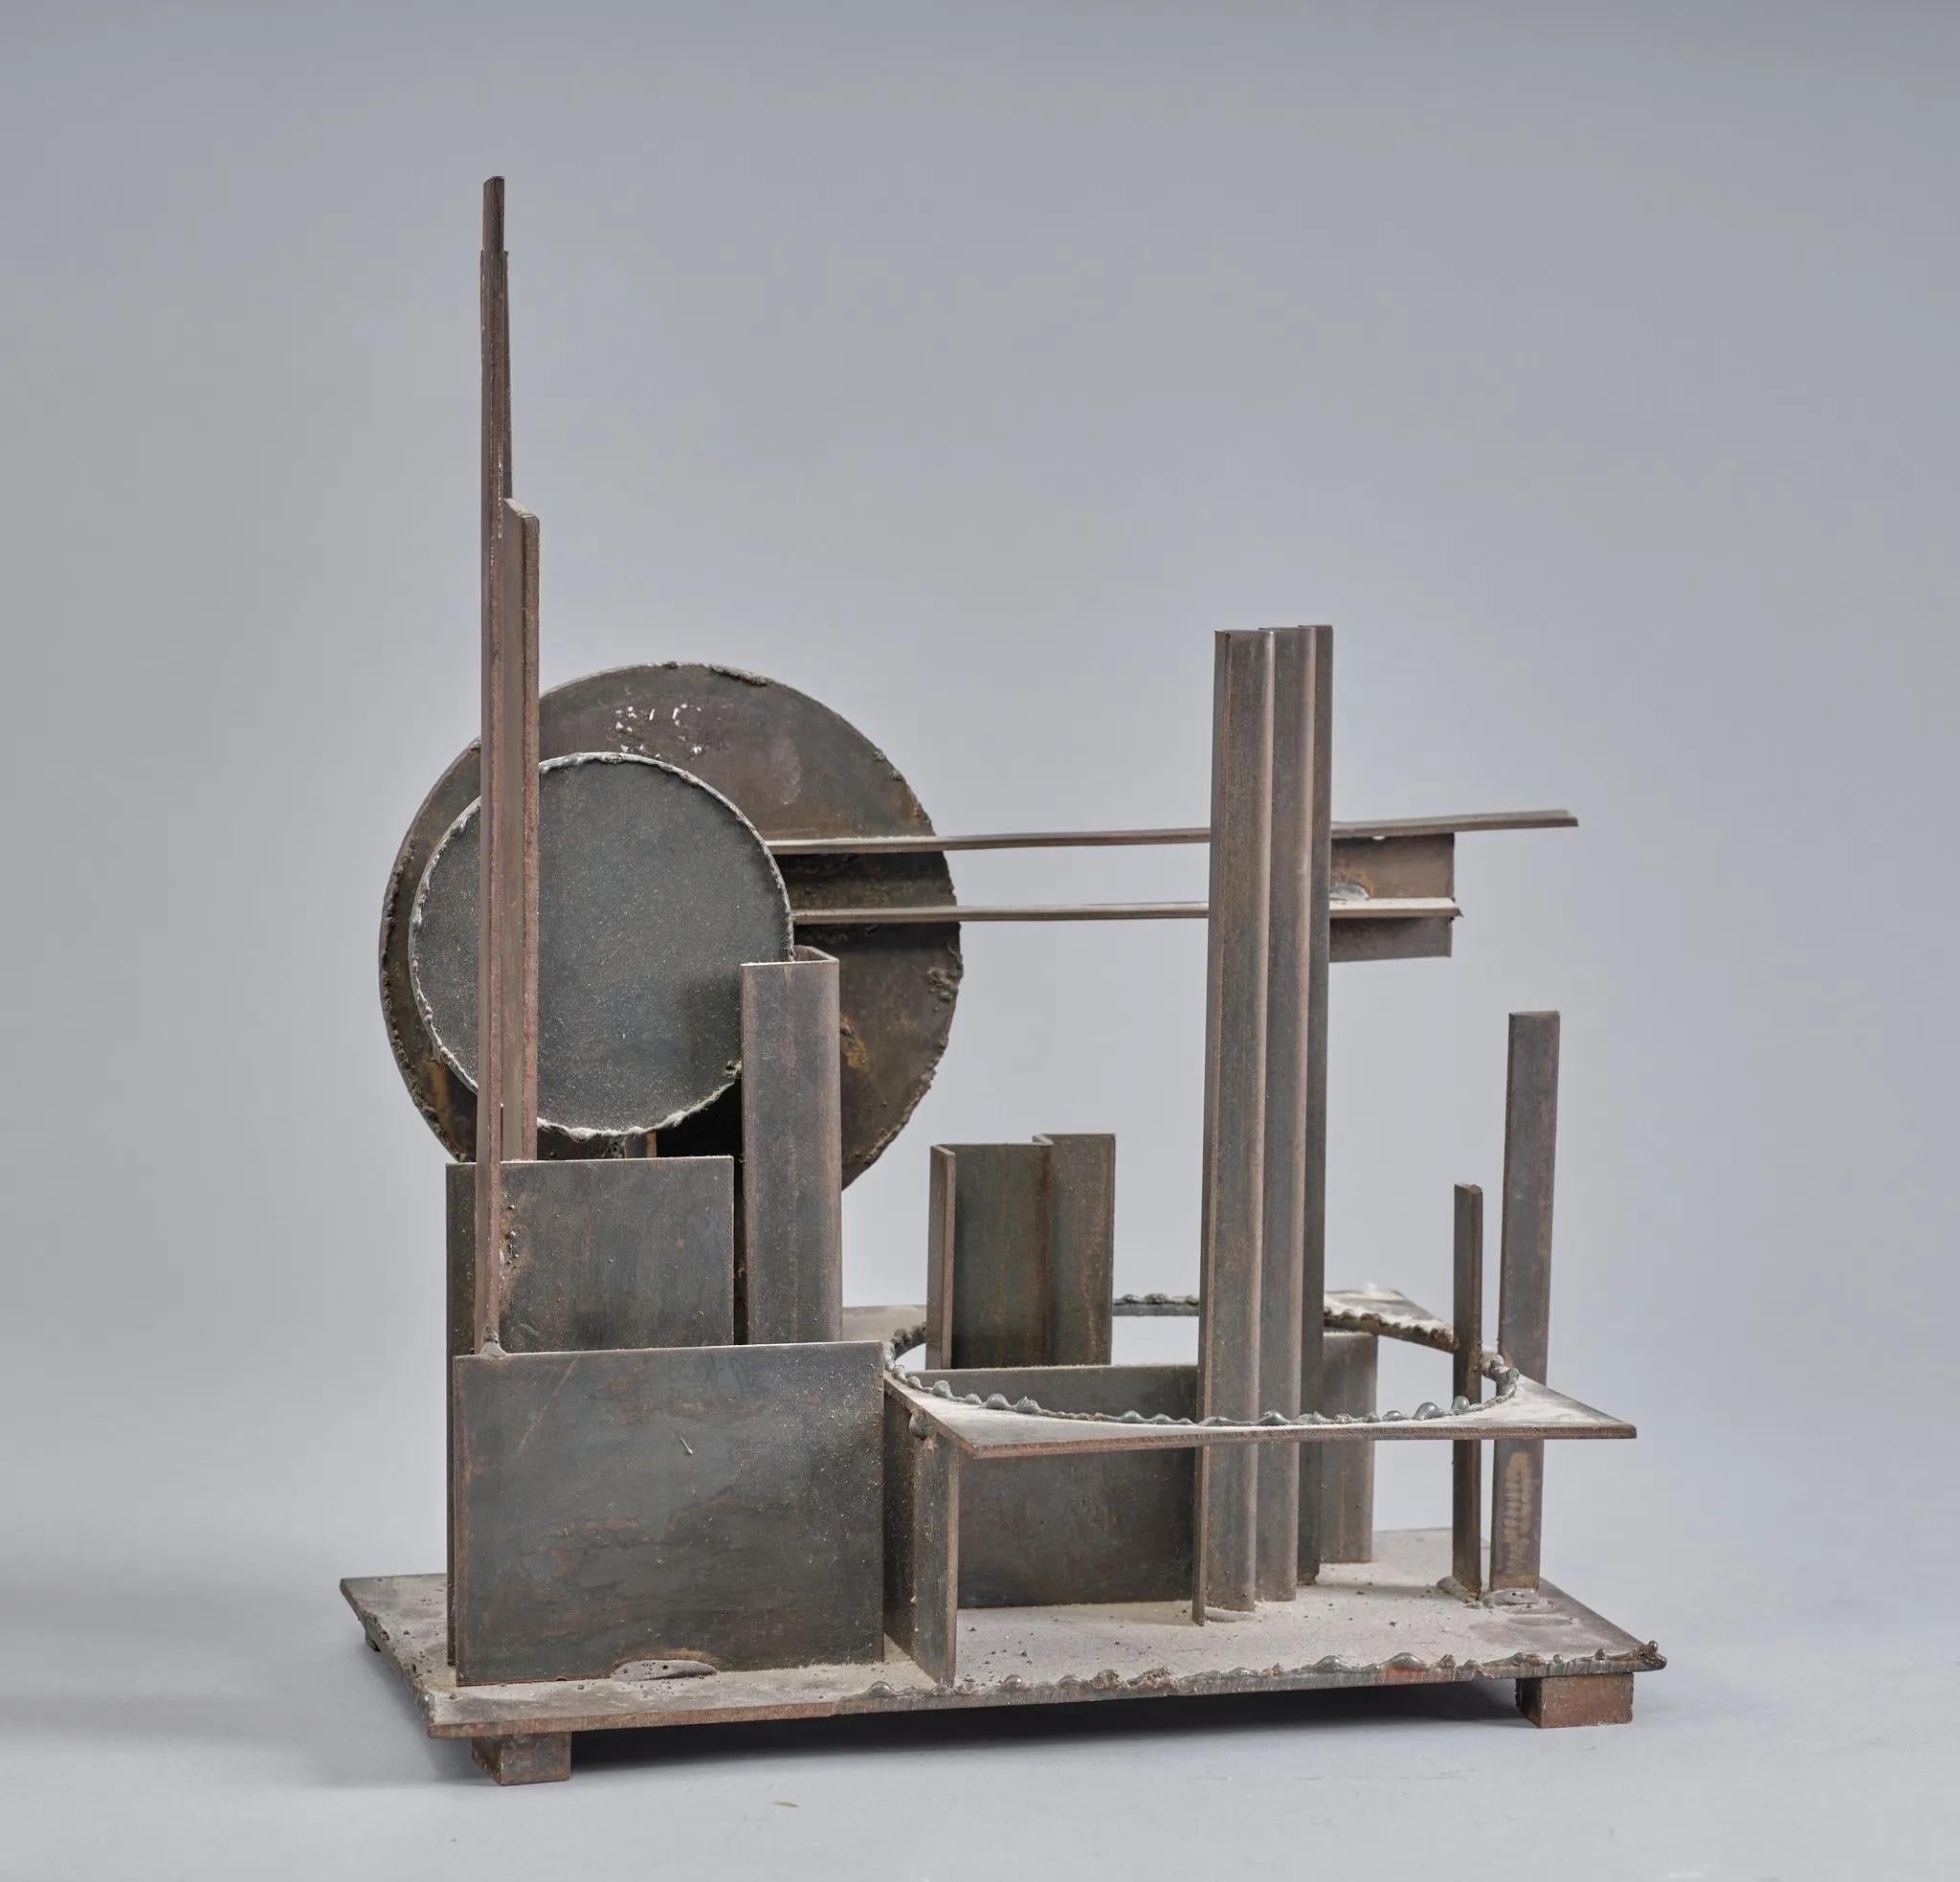 Marcel Ramond (1935-) Metal geometric sculpture, circa 1970

Welded iron 

Signed under the base

A certificate will be provided to the buyer 

Length 44 x Height 38 x Depth 18 cm